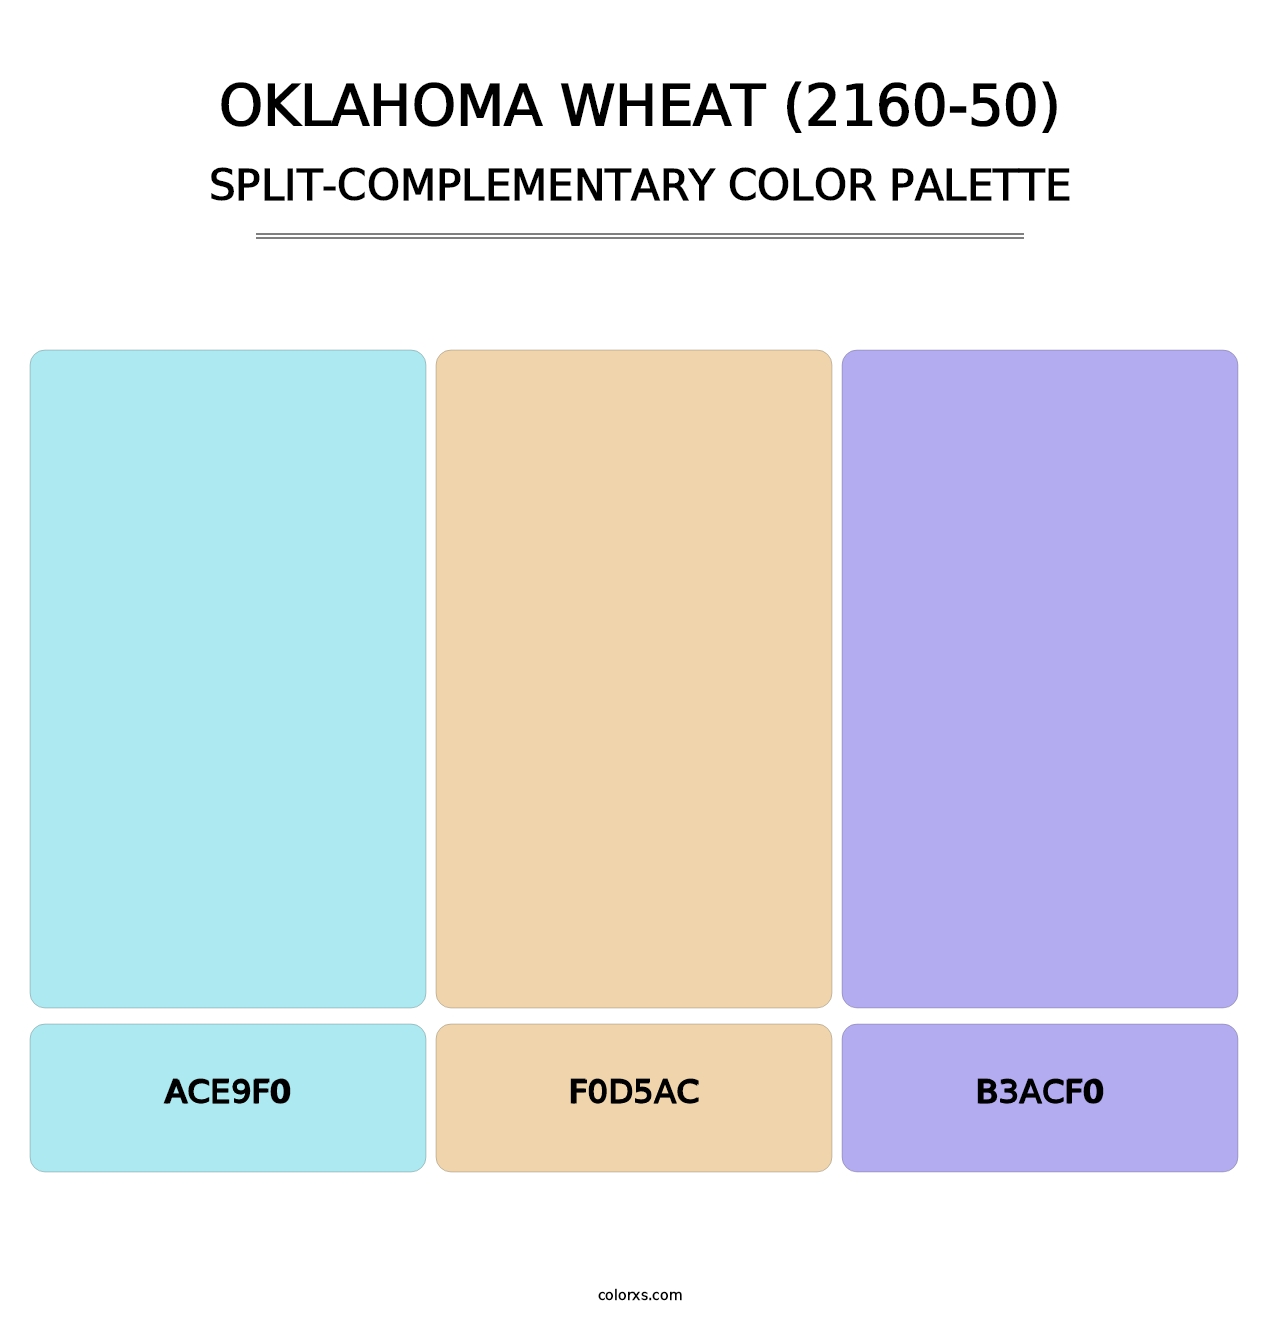 Oklahoma Wheat (2160-50) - Split-Complementary Color Palette